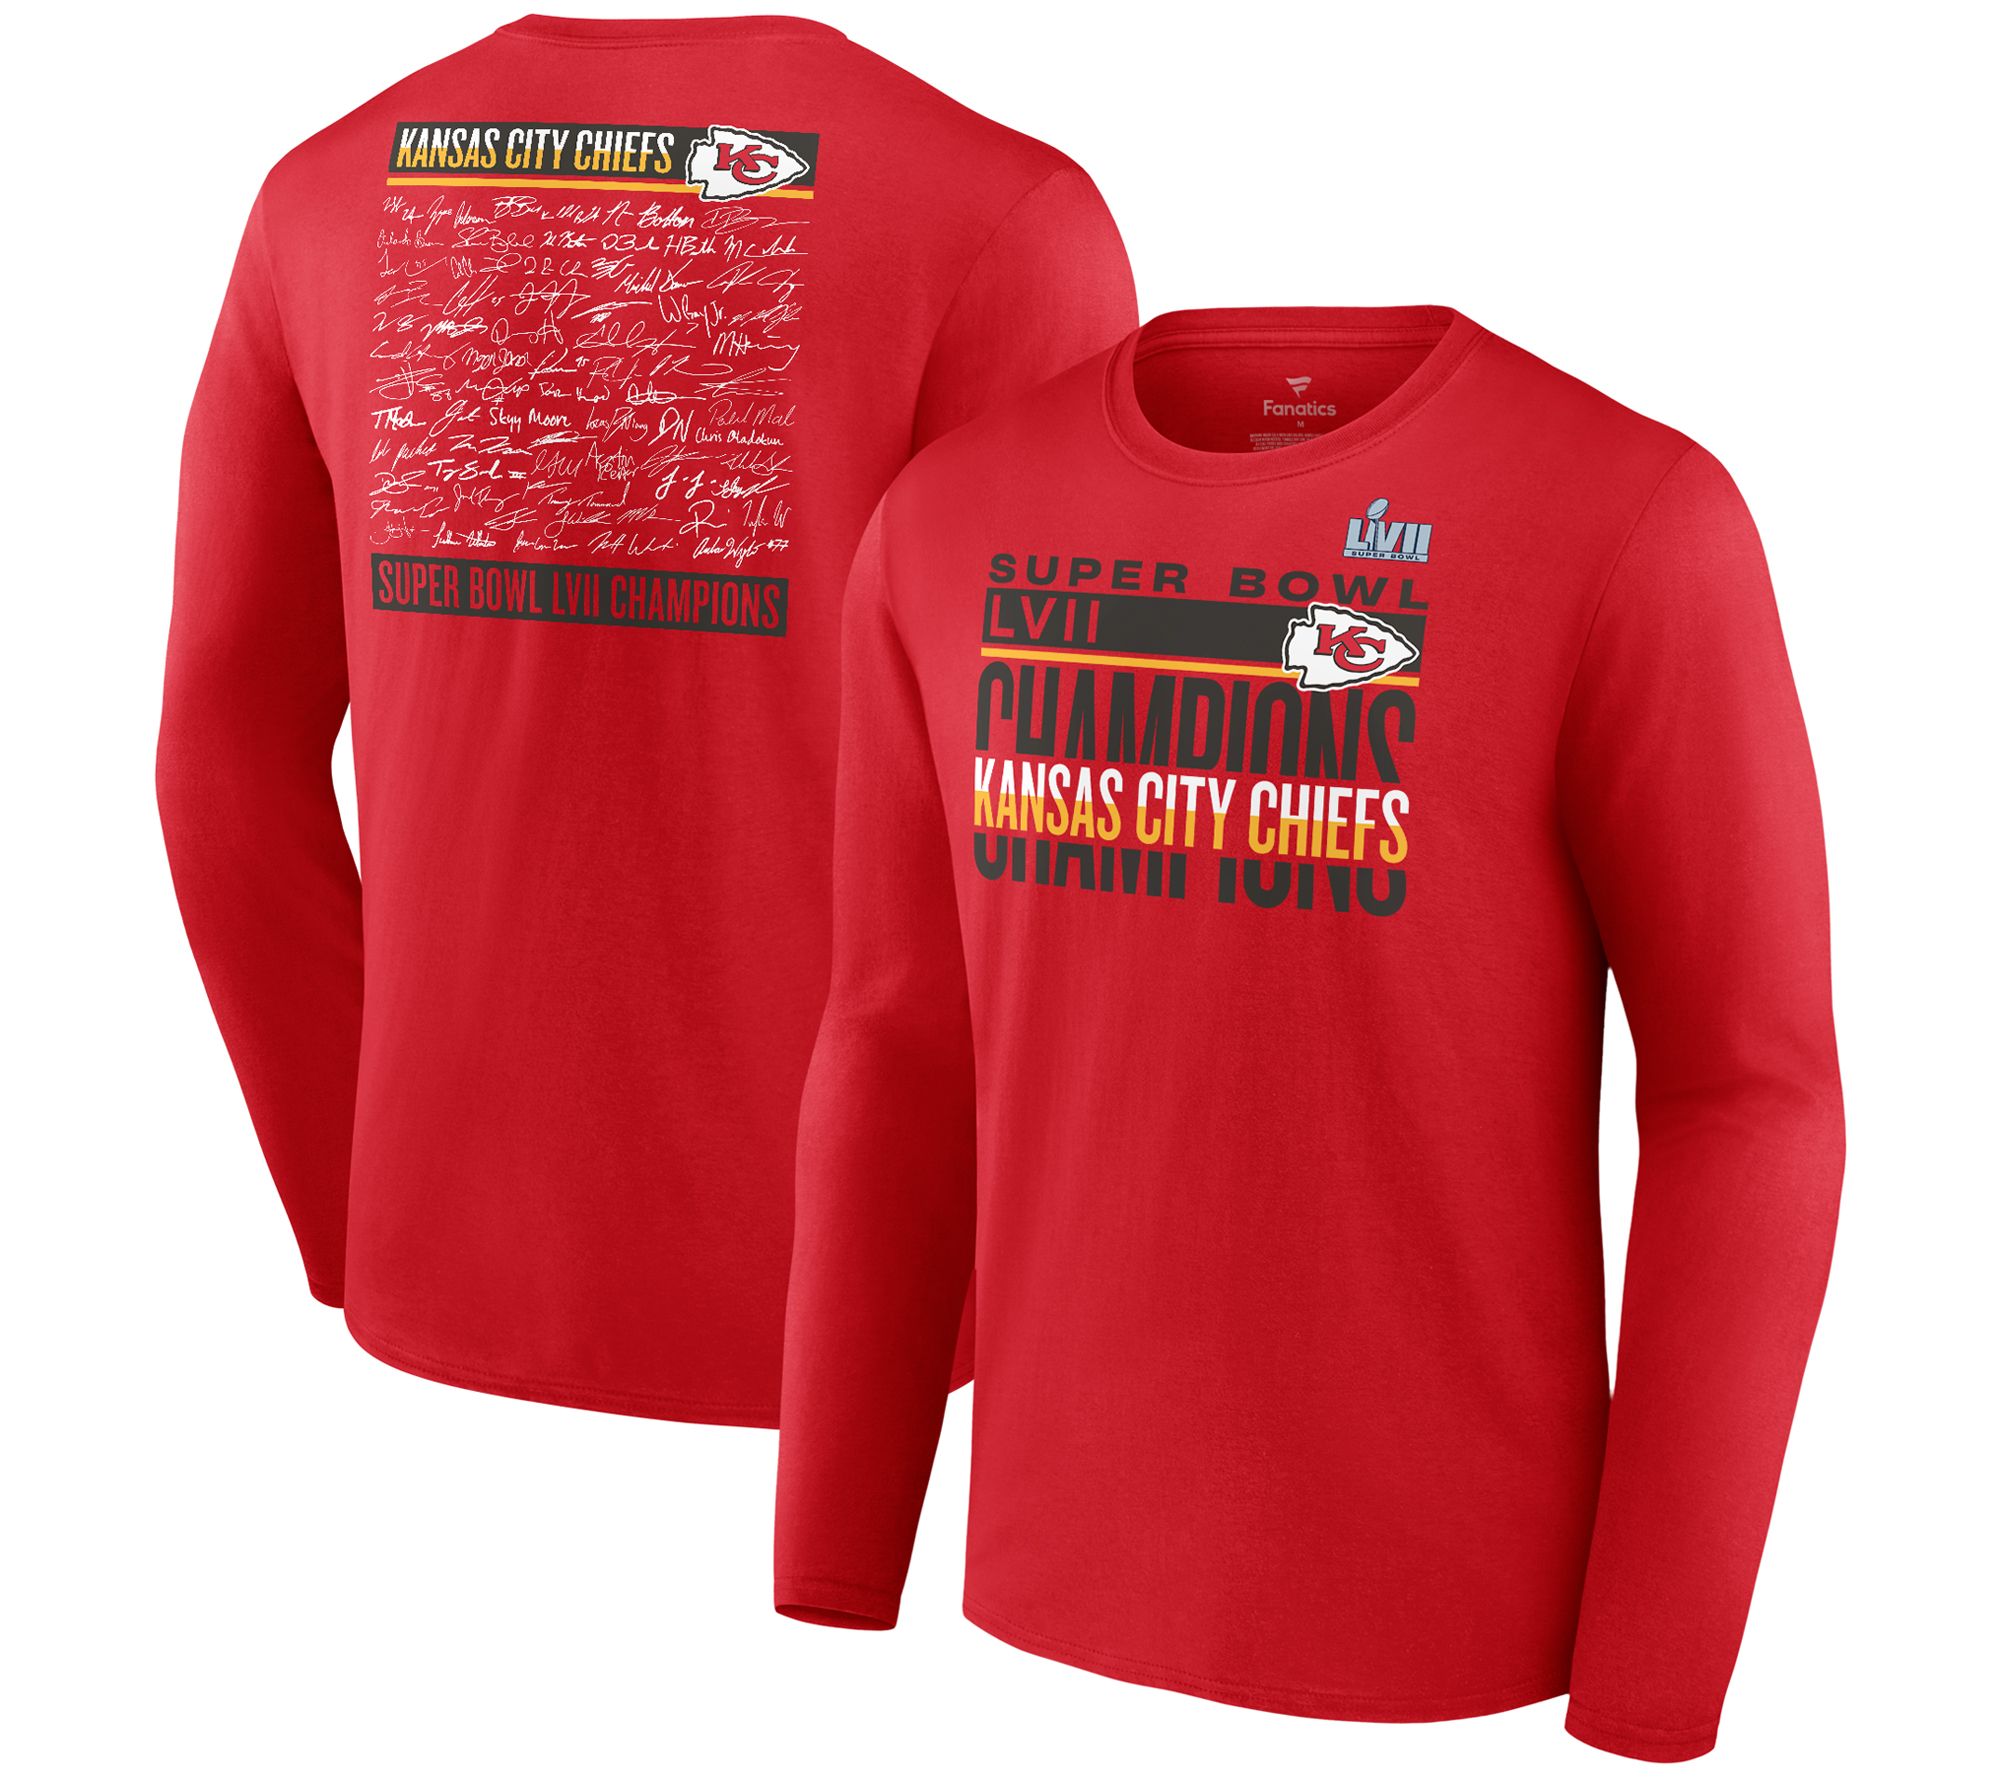 As Is' NFL Super Bowl LVII Champions Chiefs Roster L/S Tee 